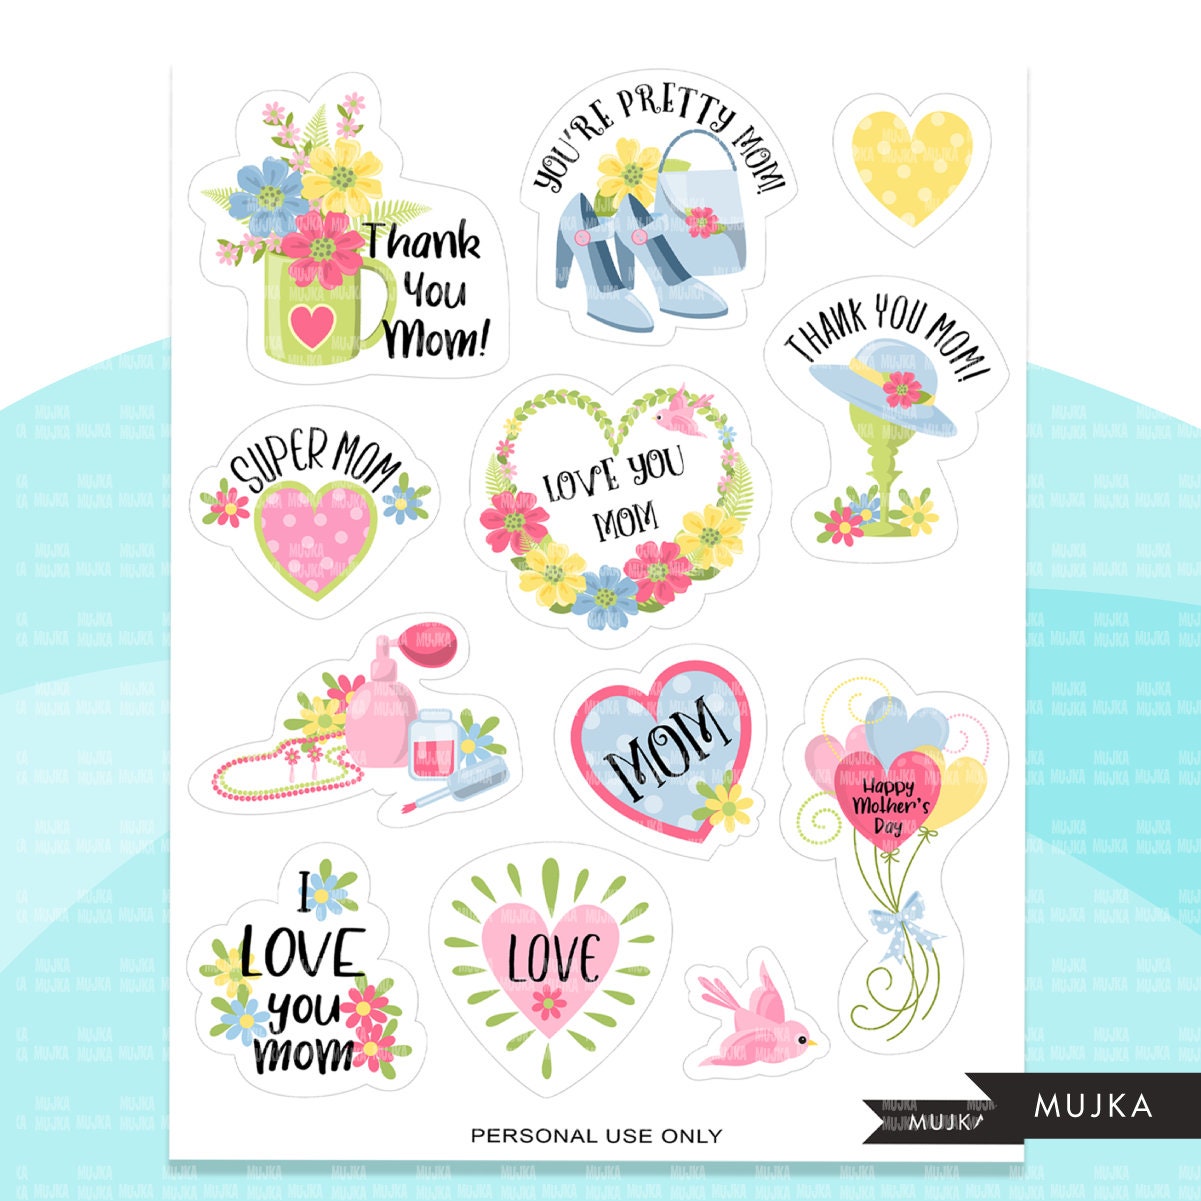 Love Printable Stickers in Black & Pink Graphic by Summer Digital